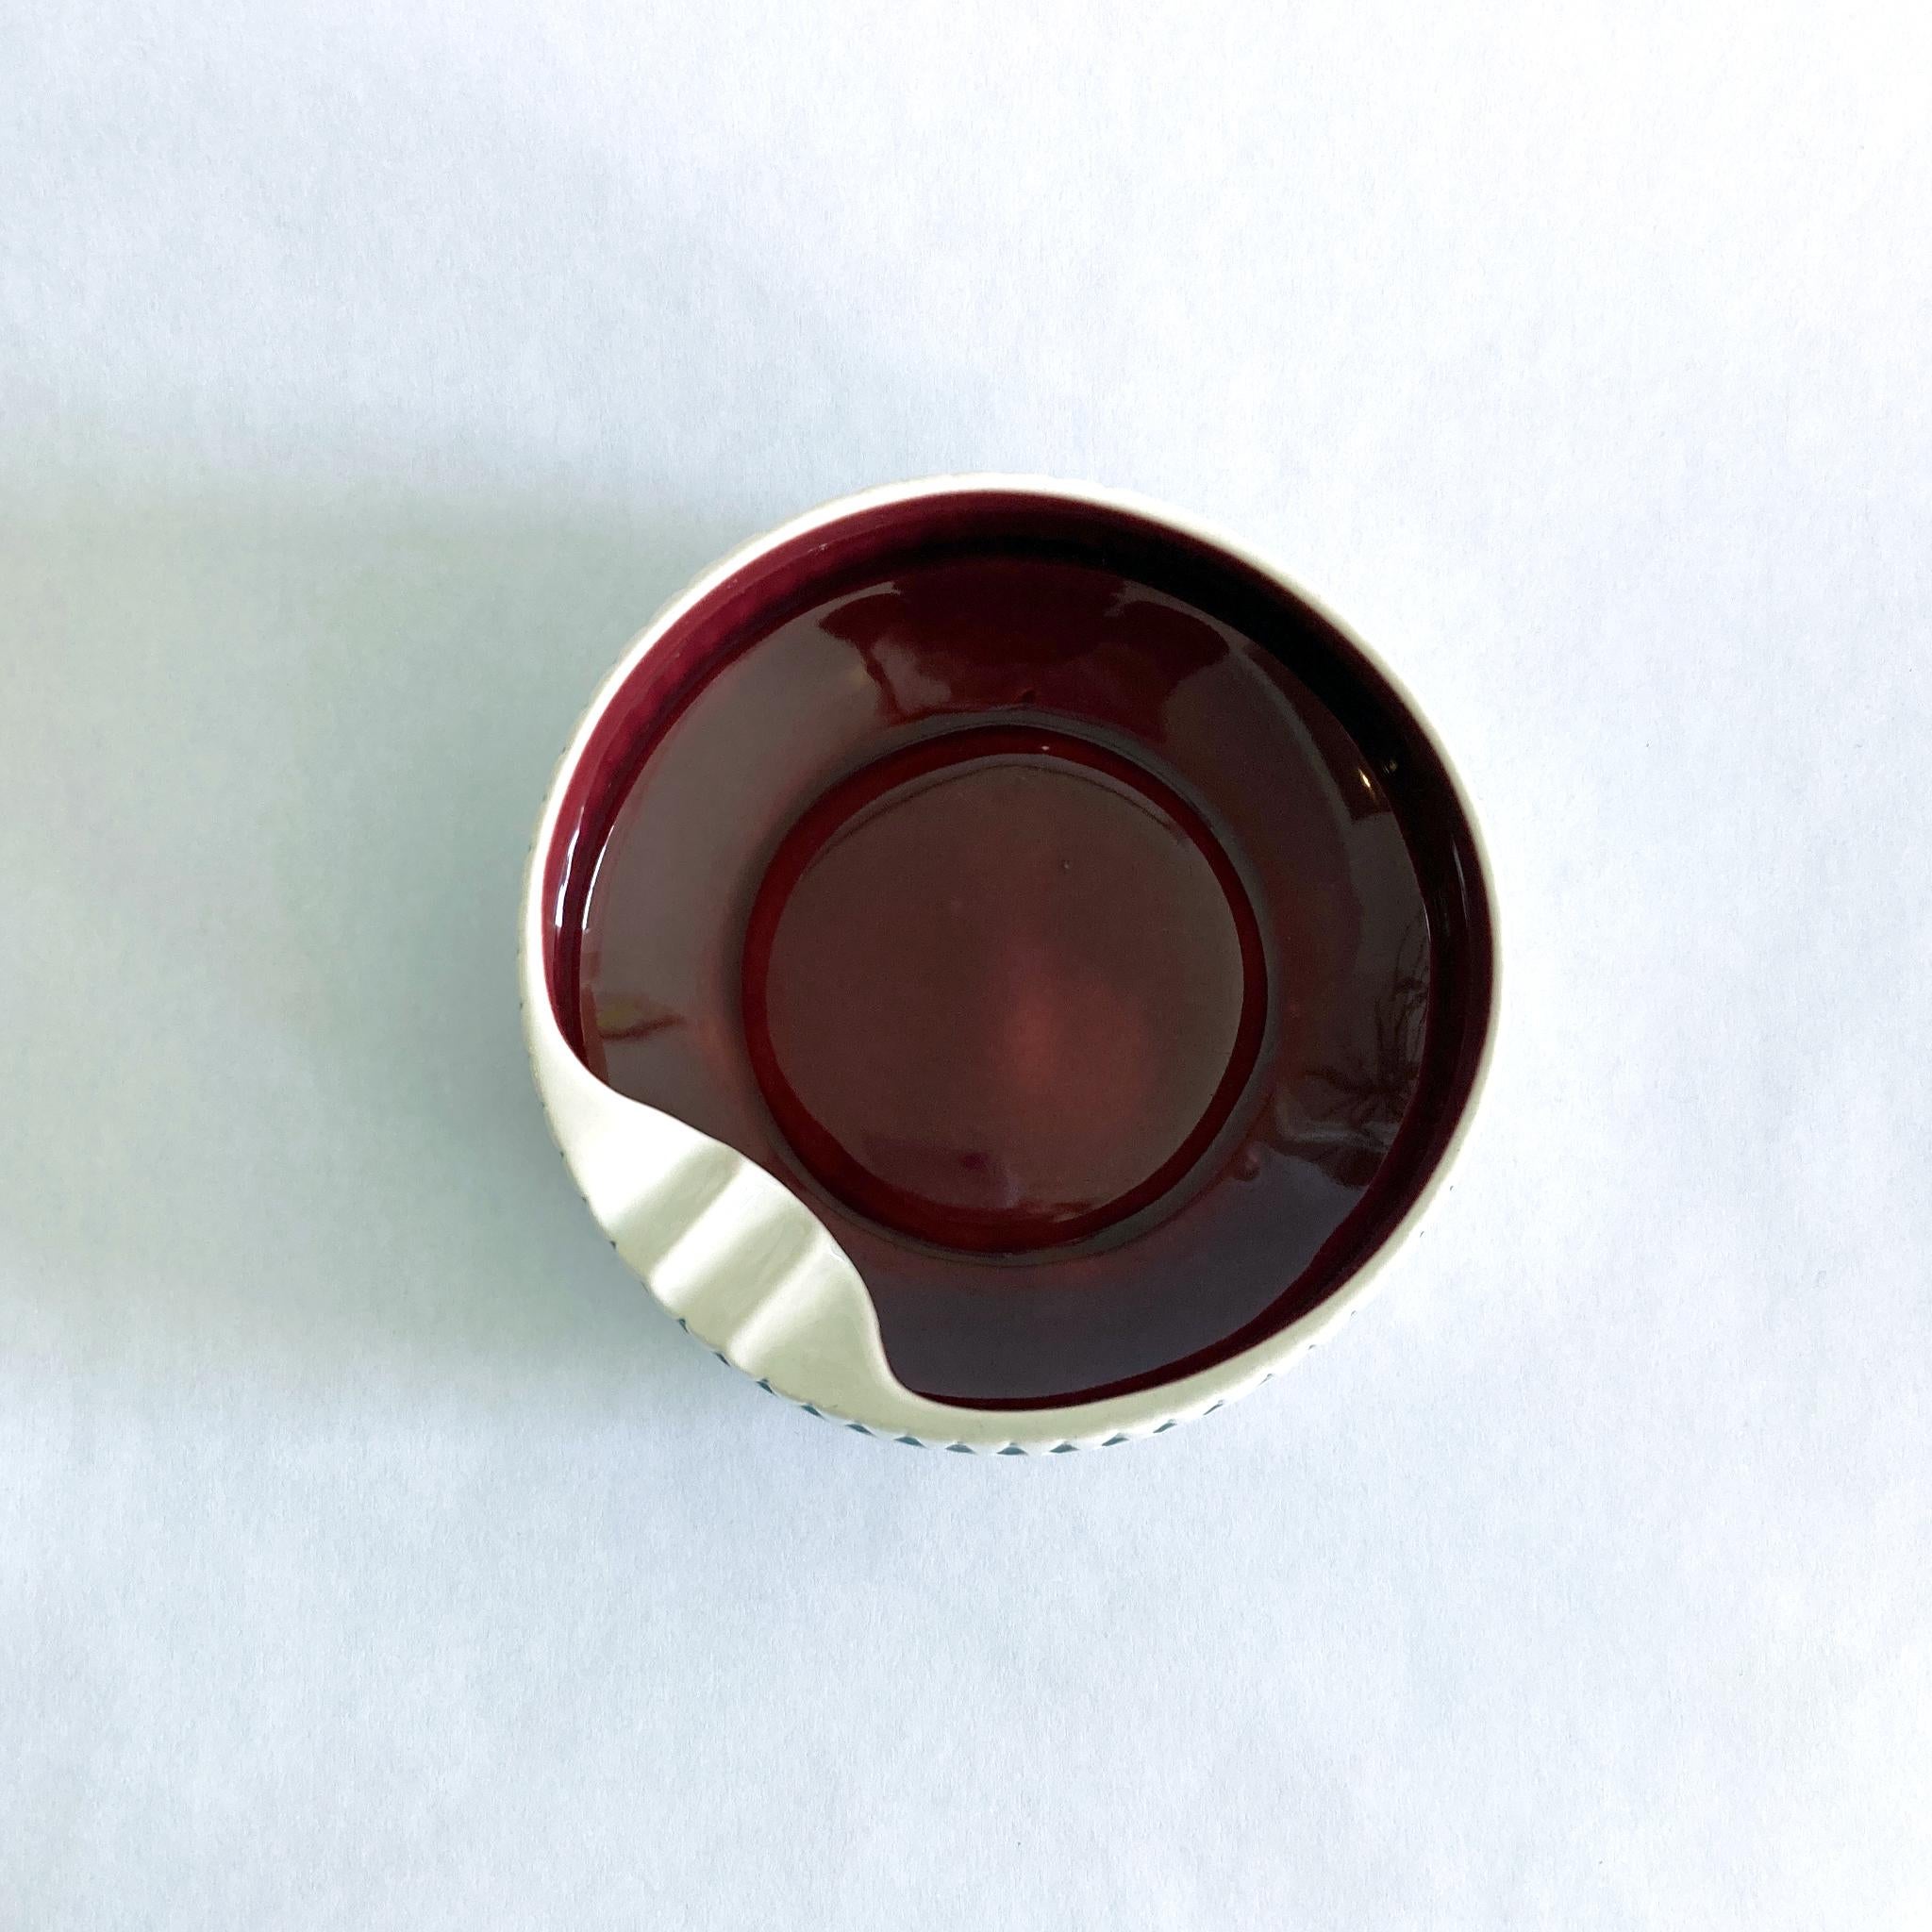 Mid-20th Century Hornsea Pottery by John Clappison Vide Poche in White, Black and Burgundy, 1950s For Sale